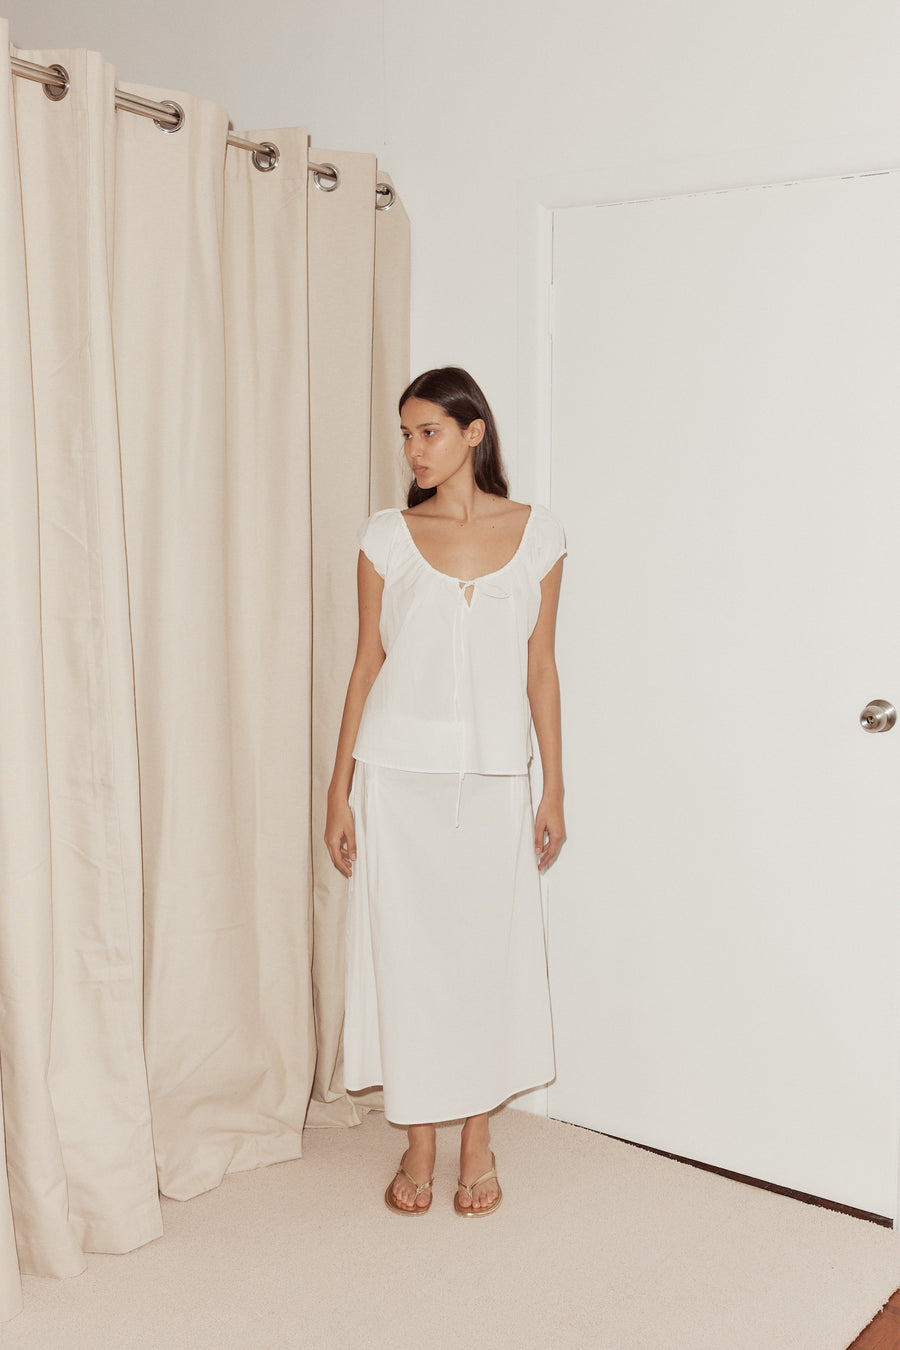 mid shot female model wearing one panel top by Deiji Studios in white. Elevated everyday top with capped sleeves, drawcord neckline with keyhole detail and a relaxed fit. Styled with pintuck skirt in white, relaxed and mid length.